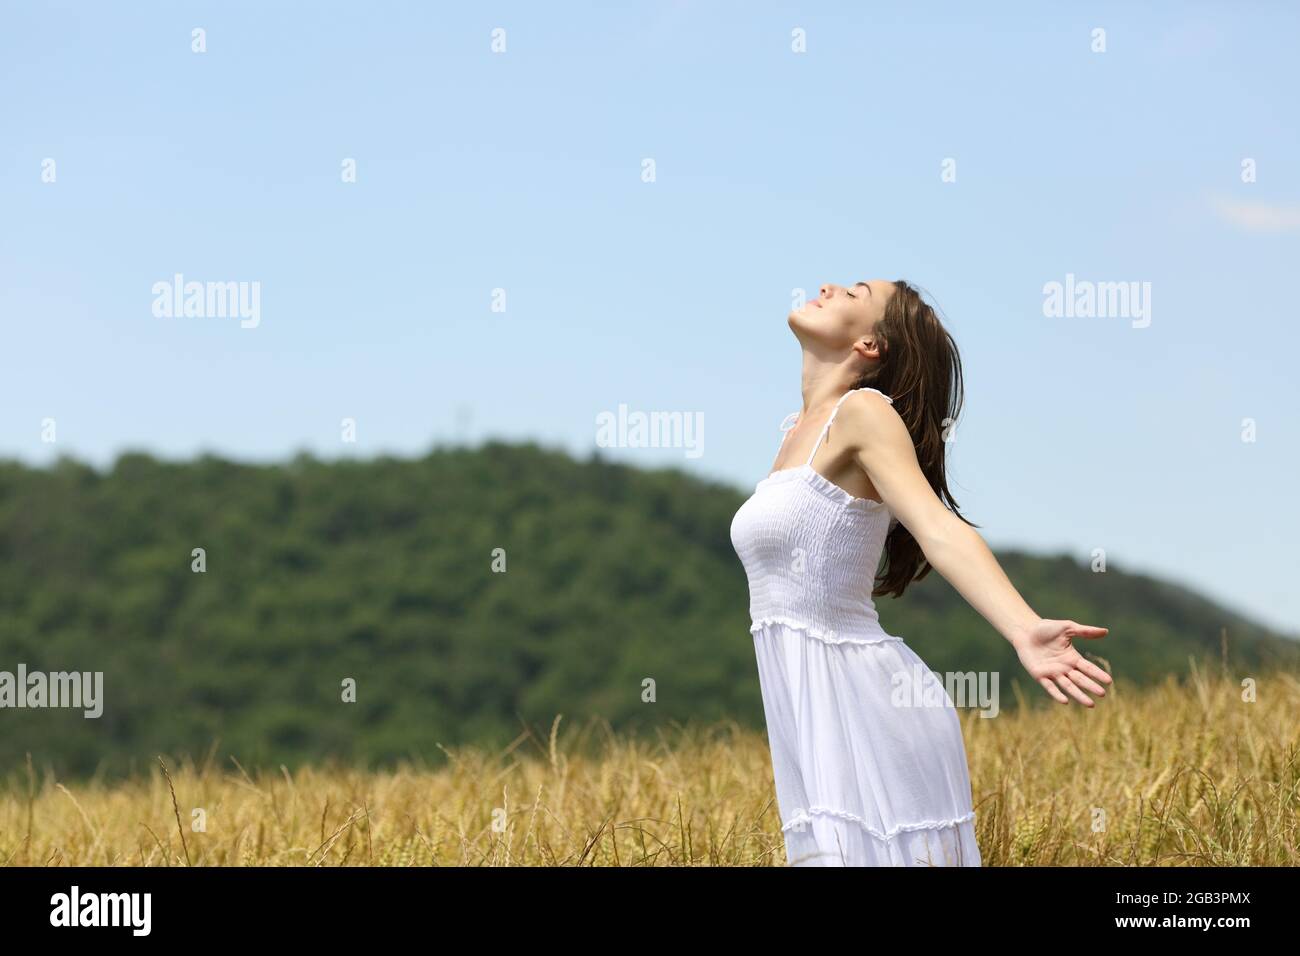 Profile of a woman breathing fresh air in a wheat field on summer Stock Photo